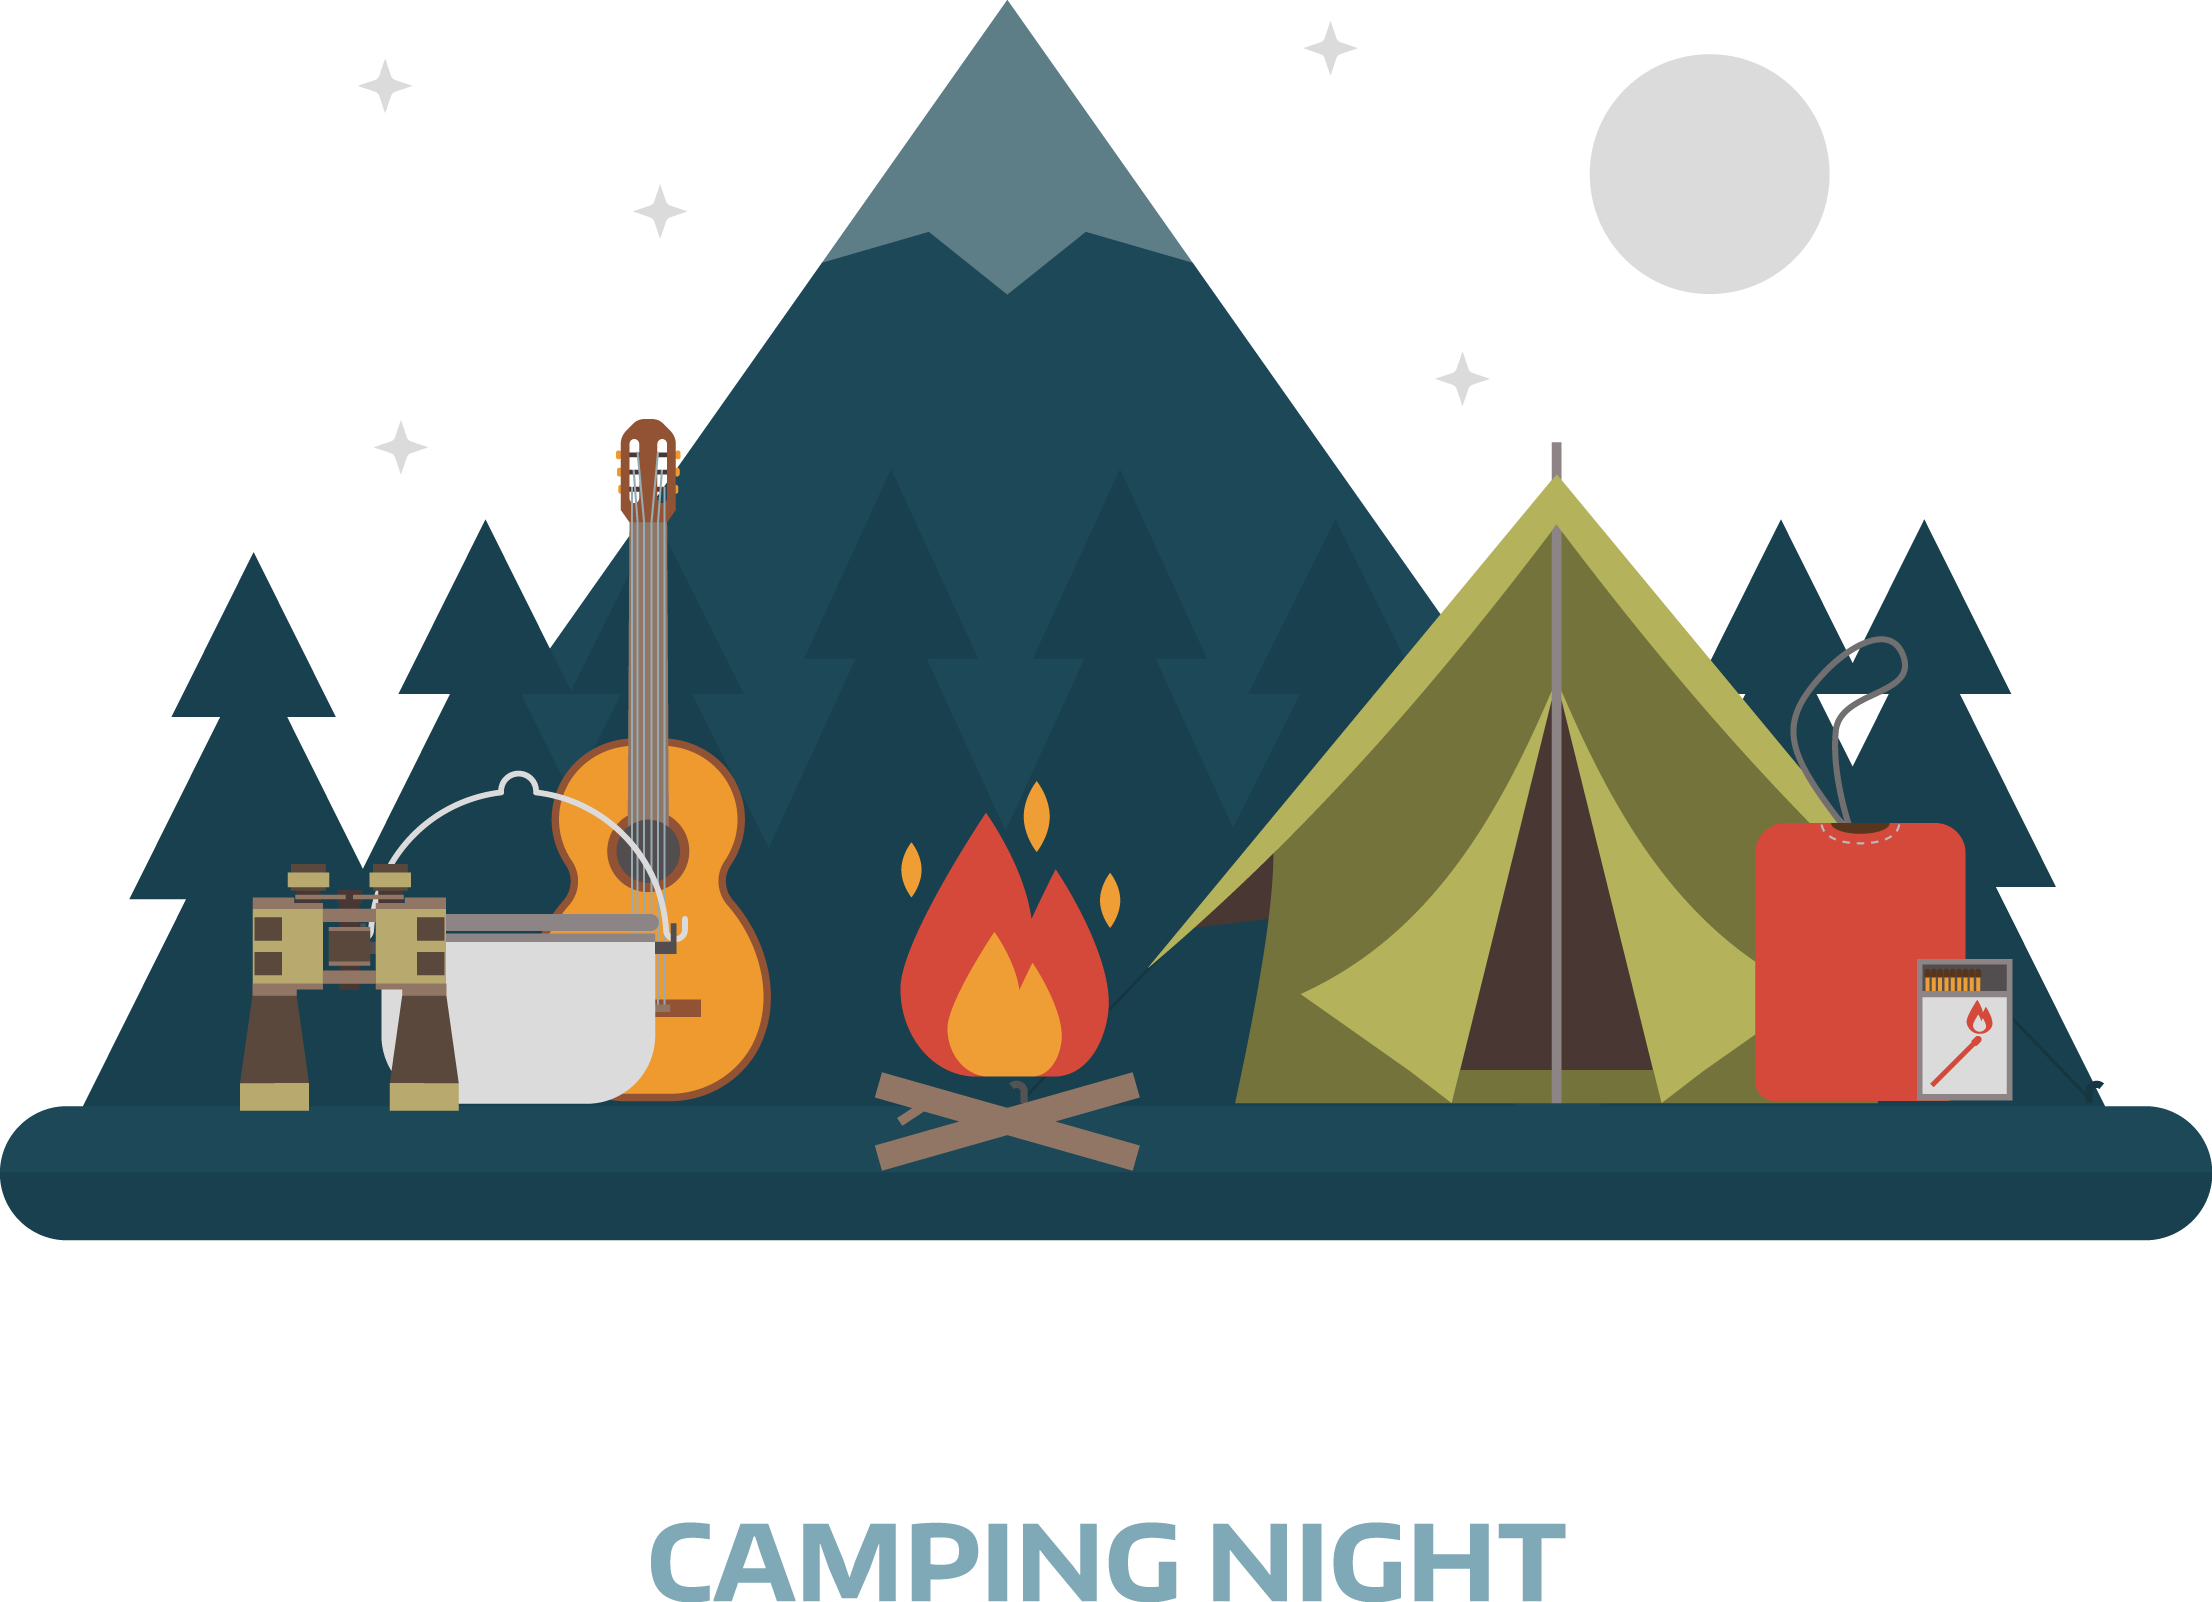 Camping Vector Illustration Png Transparent And Clipart Image For Free ...